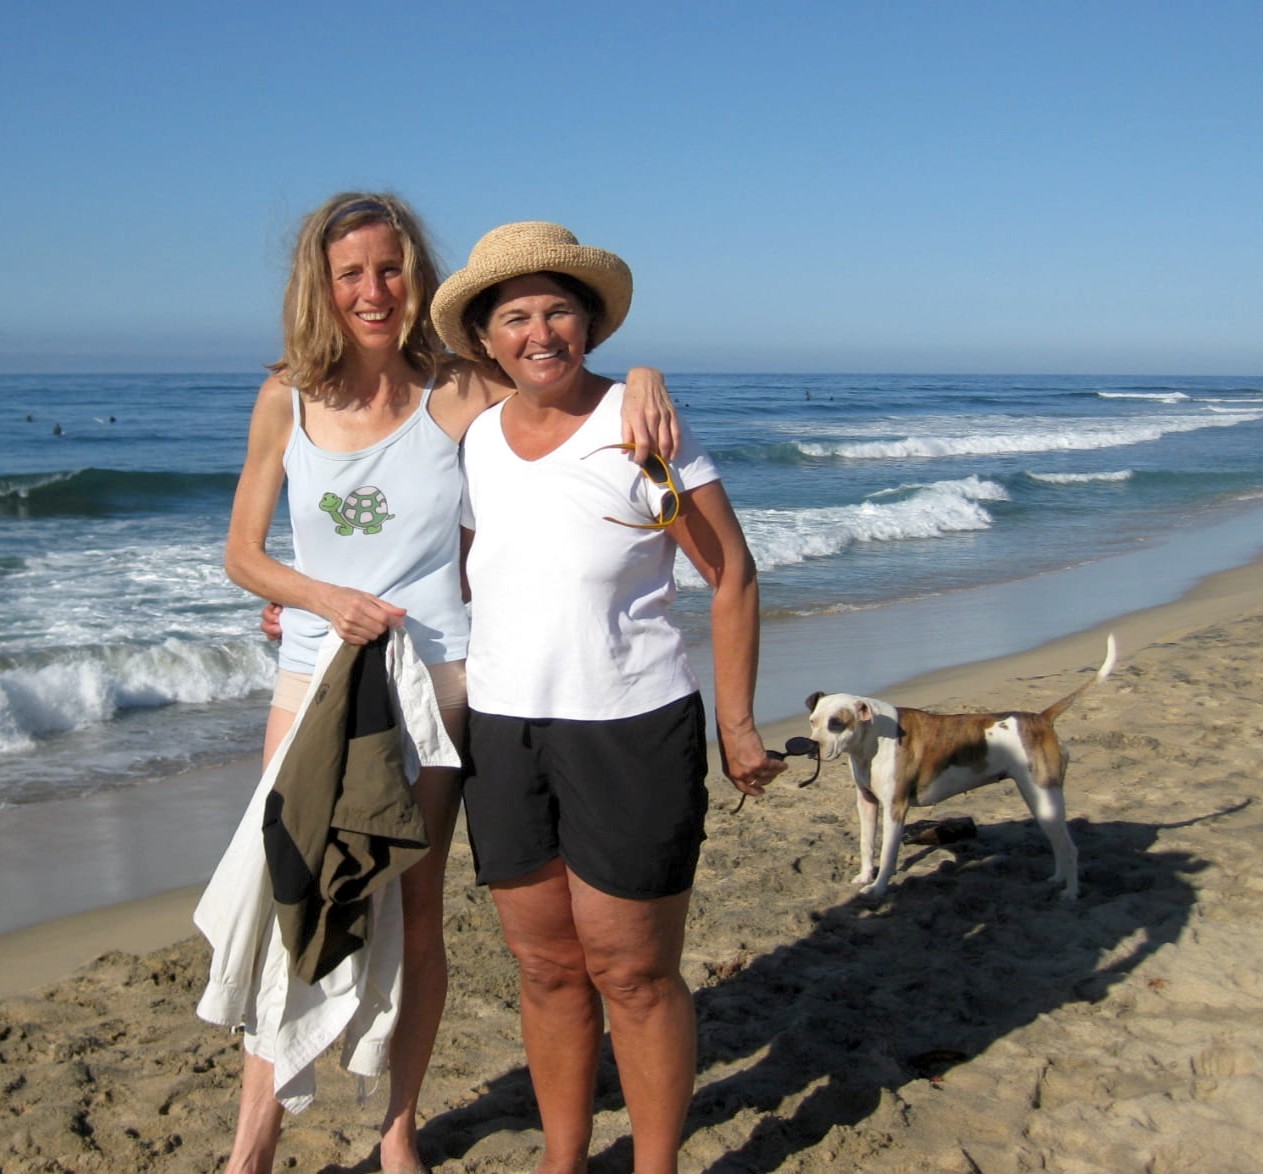 Michela Griffo and Mary O’Connor (an architect who then was her partner), Pescadera, Baja, 2011. Photo courtesy of Michela Griffo.